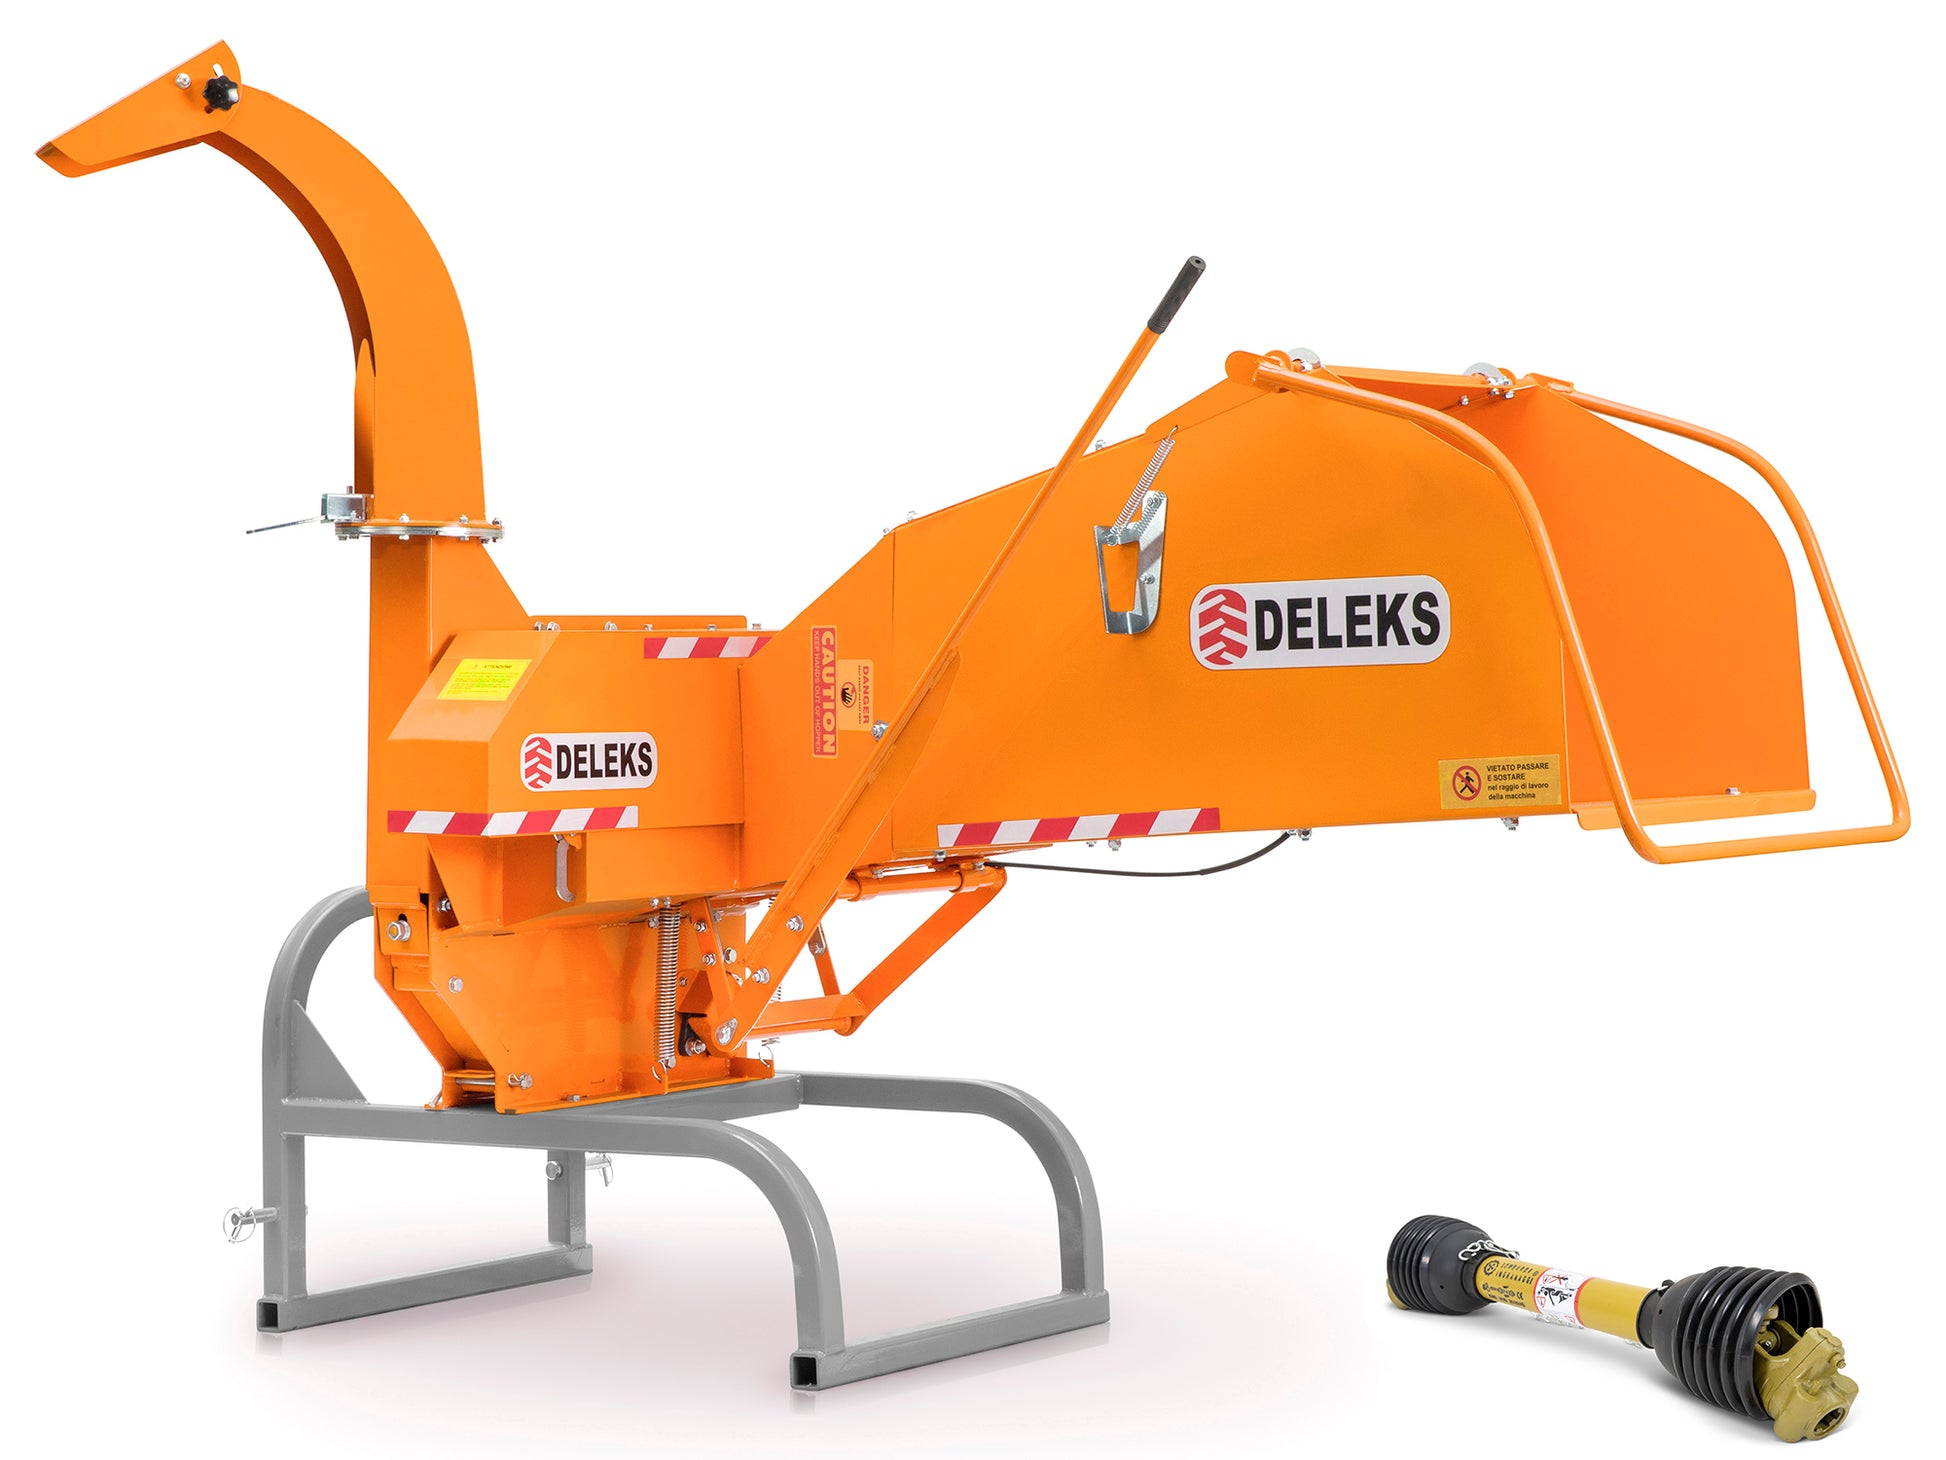 Deleks PTO Wood Chipper from CTM, deleks.uk, Goldoni All Terrain Compact Tractor